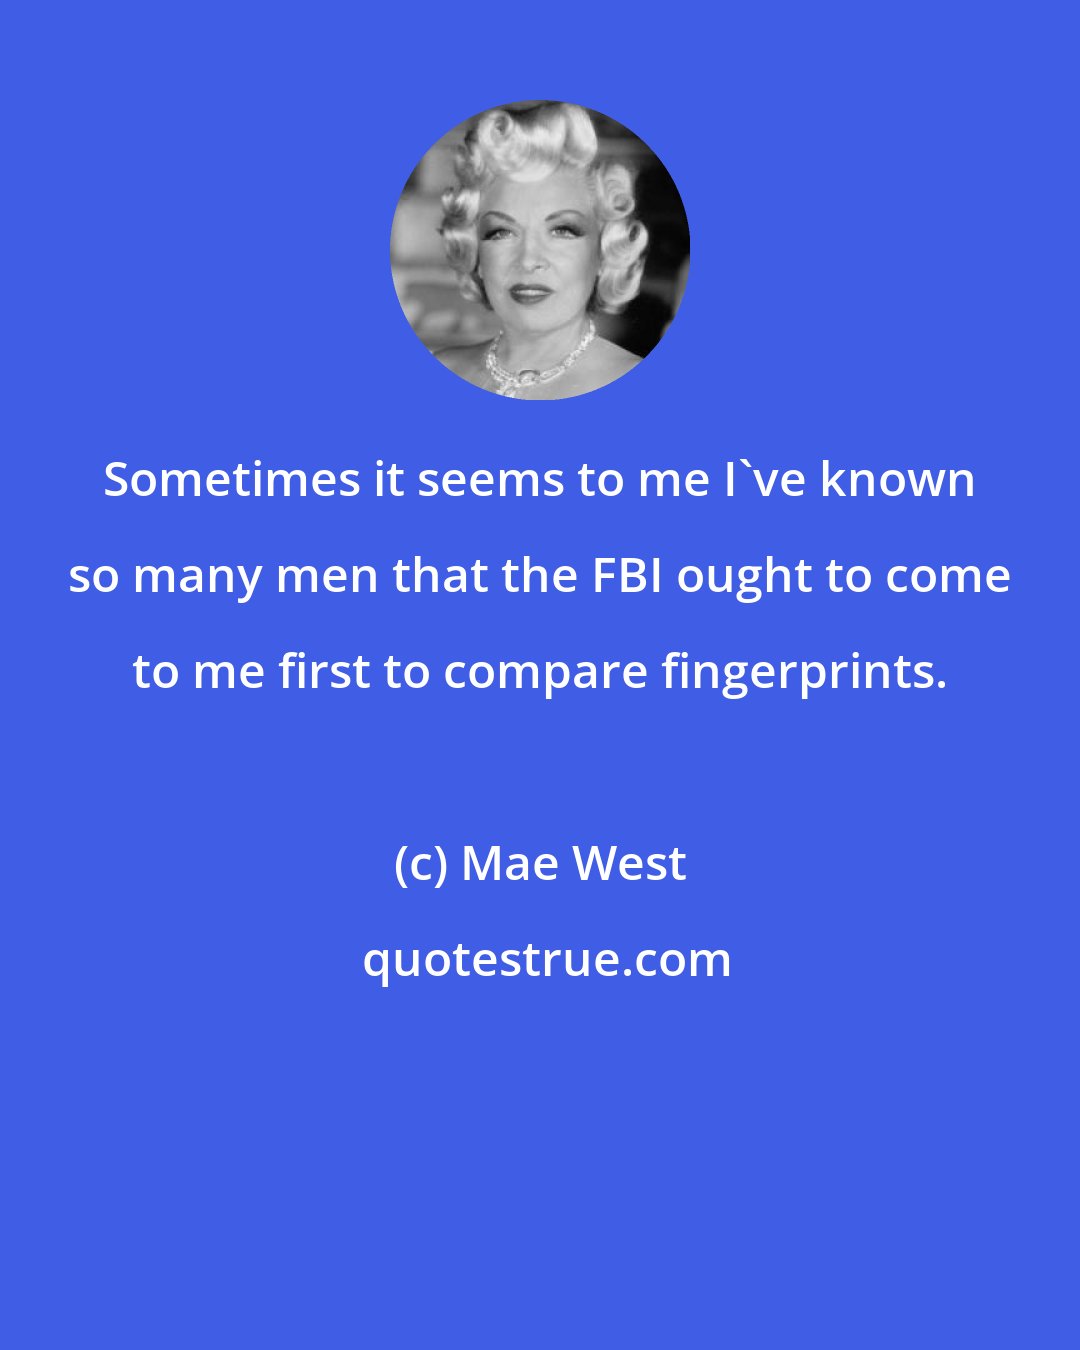 Mae West: Sometimes it seems to me I've known so many men that the FBI ought to come to me first to compare fingerprints.